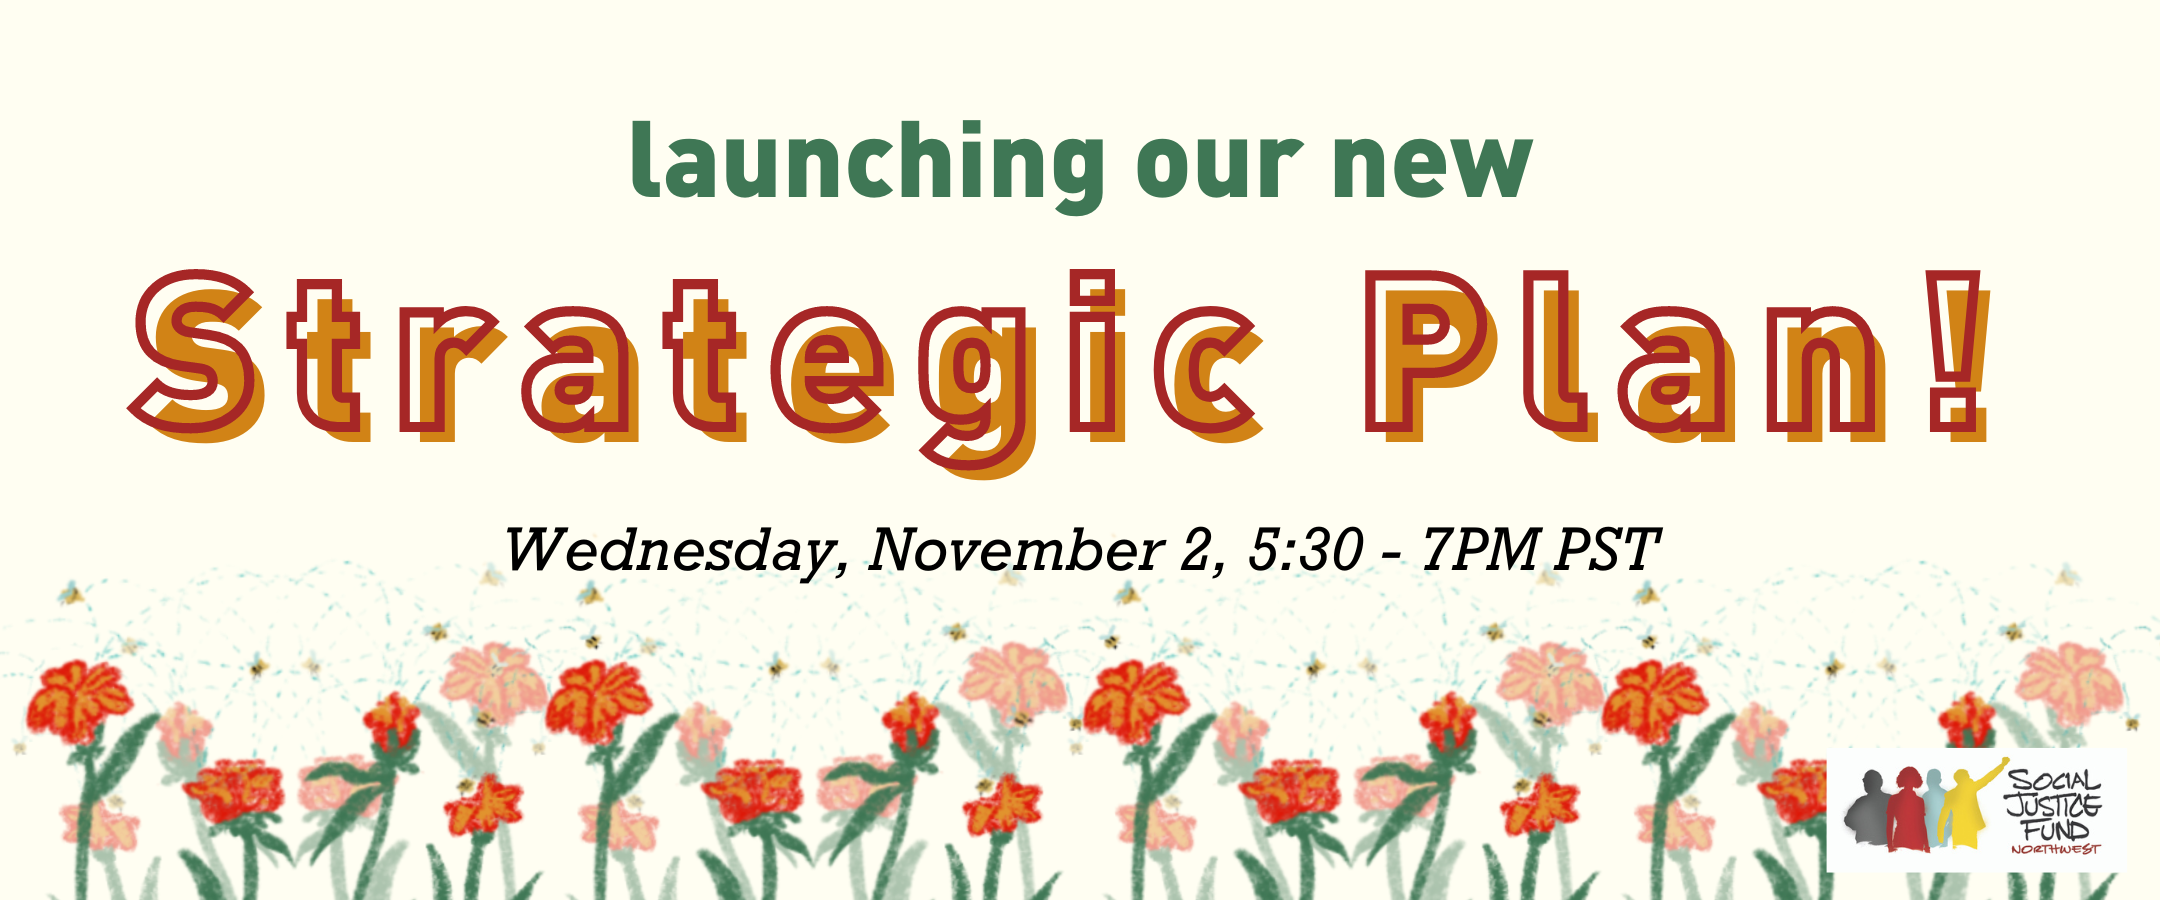 Rectangular banner with cream background and illustration of red flowers across the bottom. Text reads Launching our new strategic plan. Wednesday November 3 5.30 to 7 pm PST.